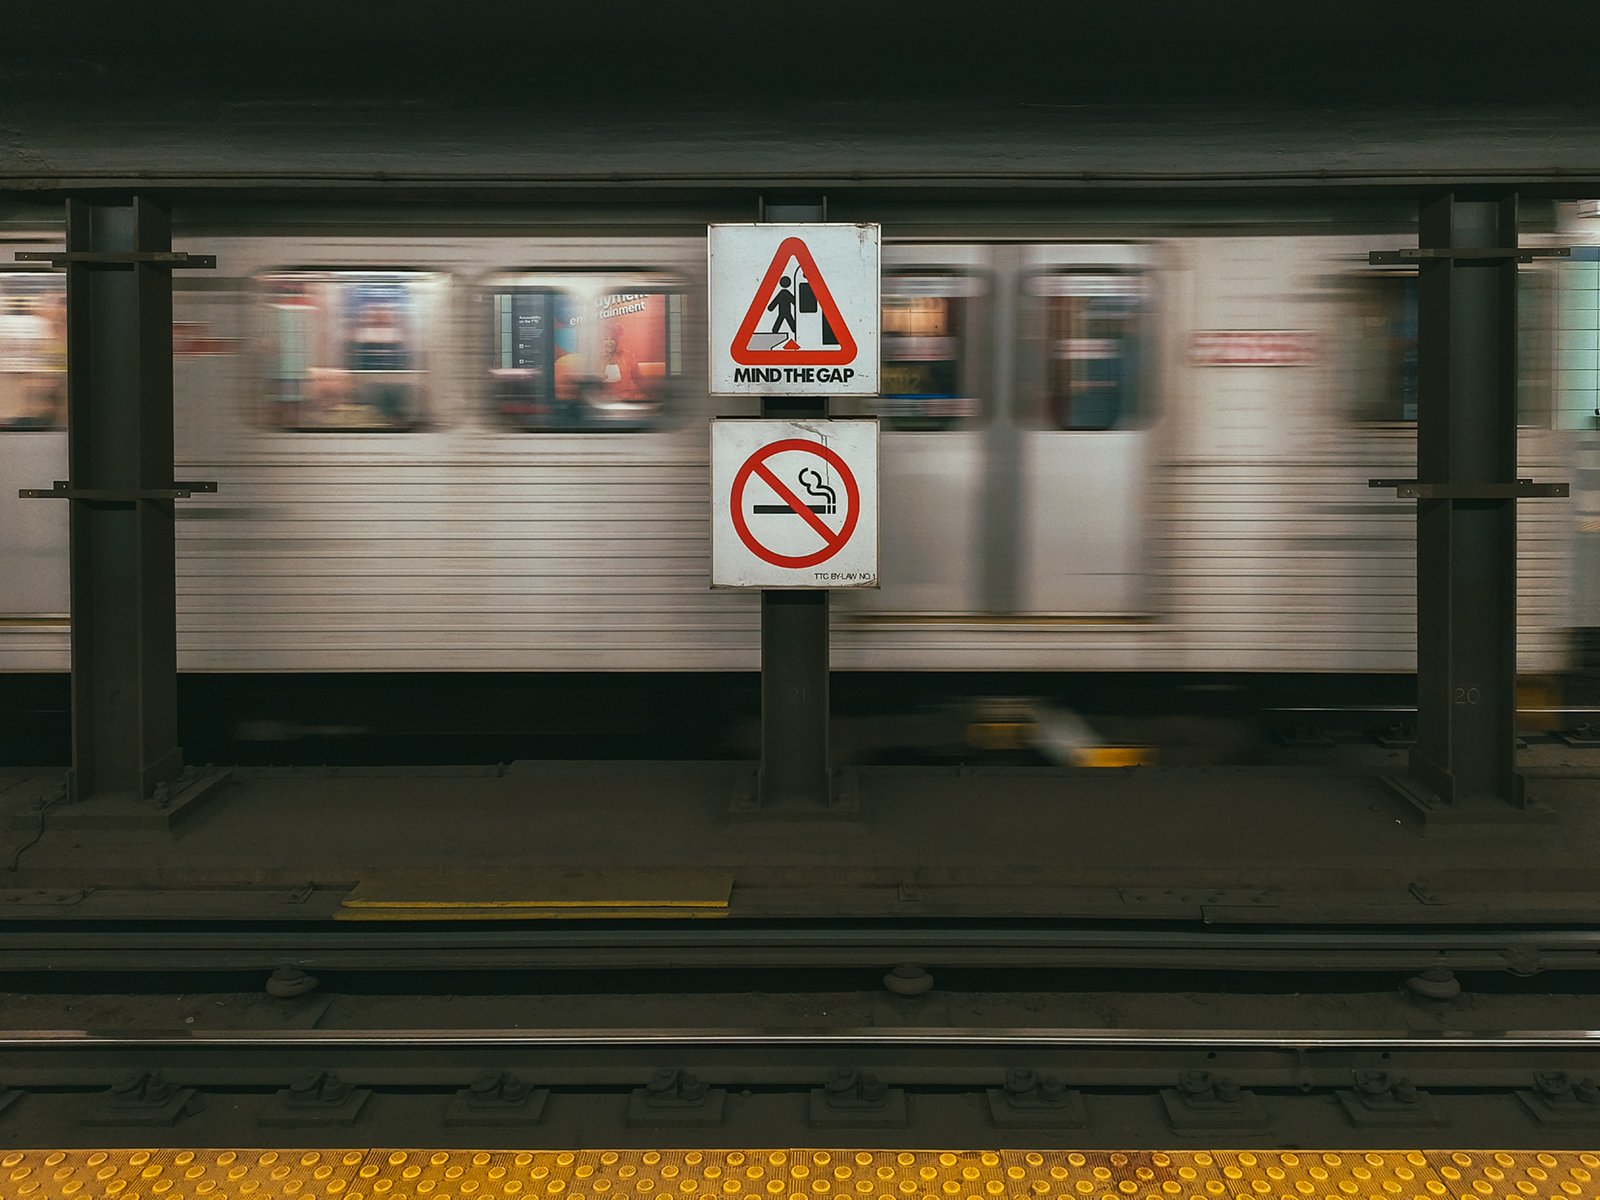 A motion-blurred subway train passing behind a platform sign with warnings "mind the gap" and "no smoking" at a station. yellow safety line visible on platform edge.